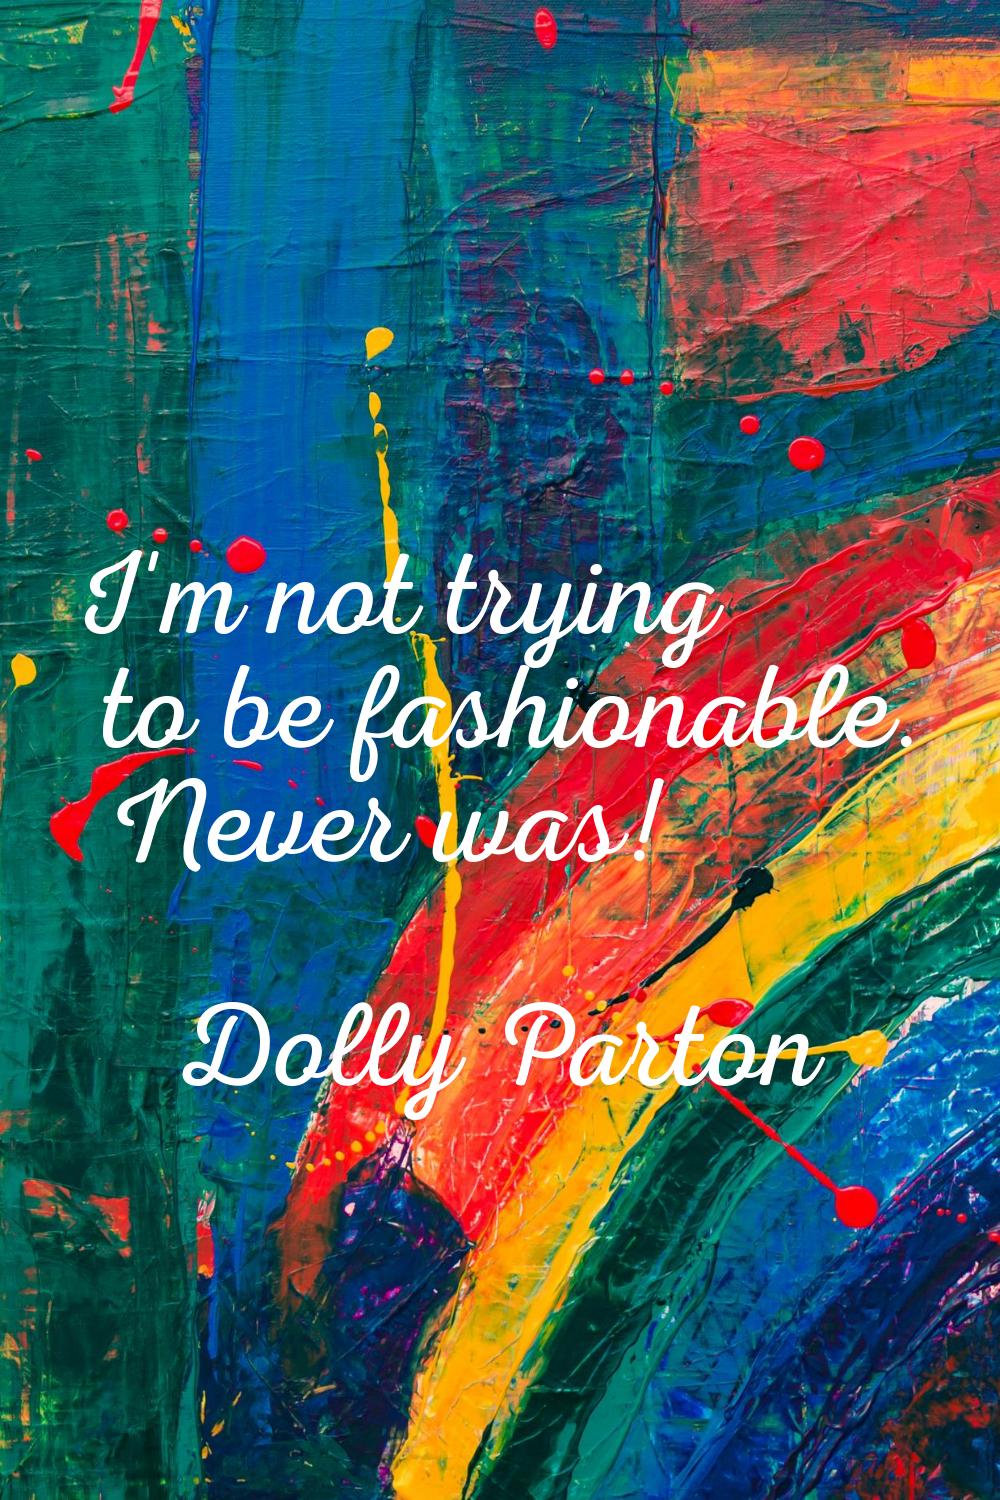 I'm not trying to be fashionable. Never was!